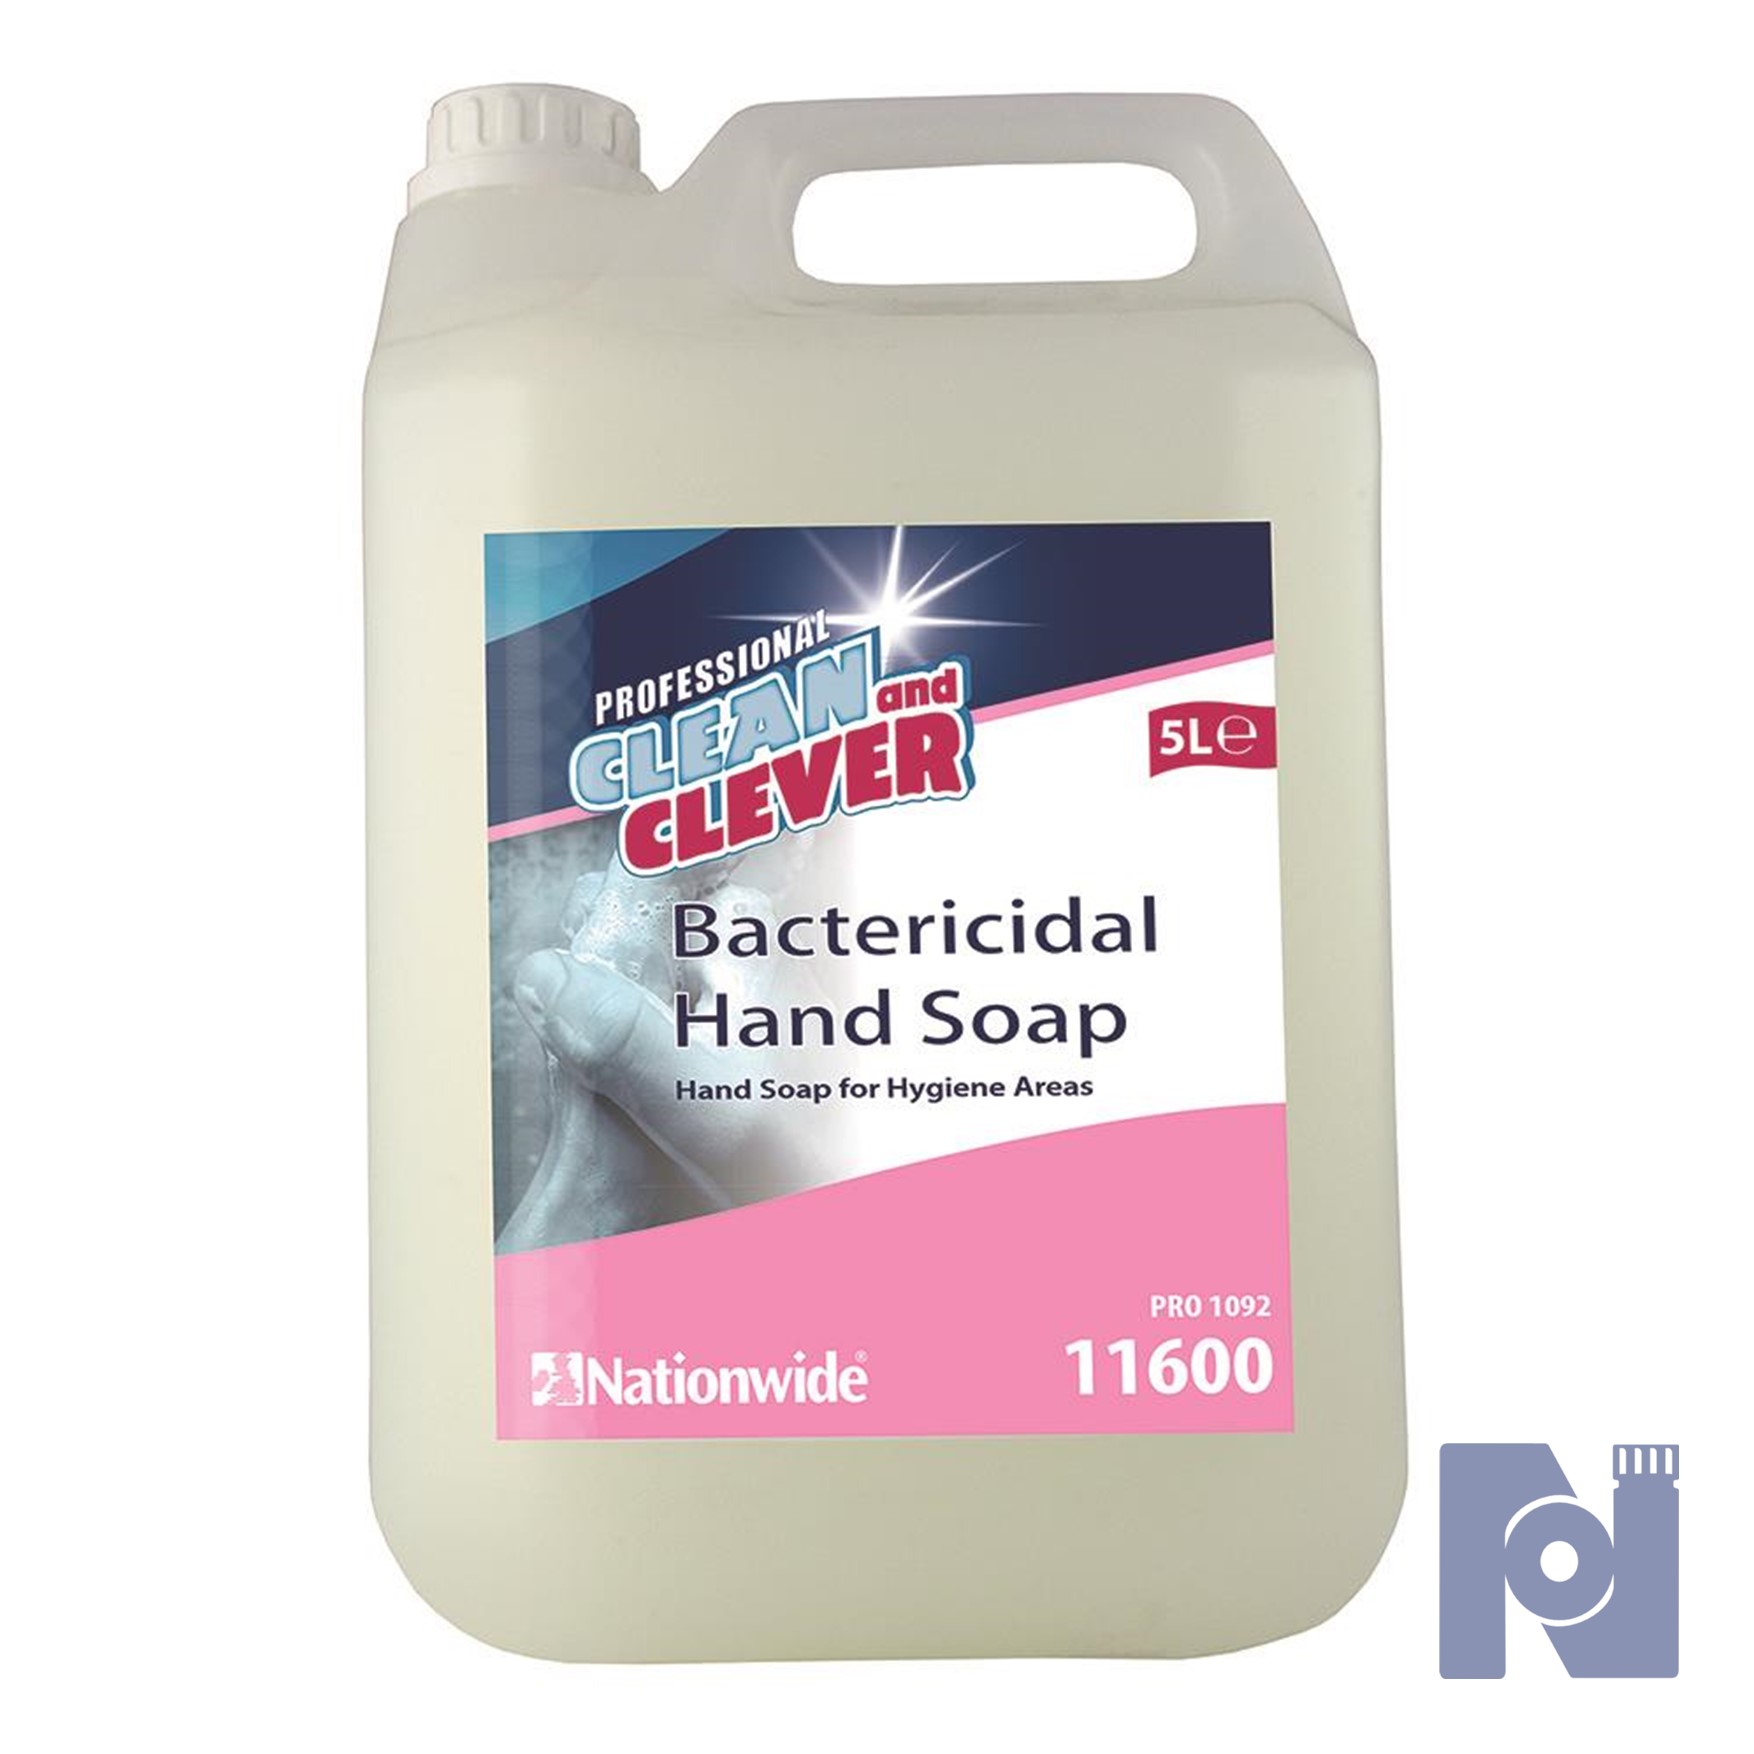 Clean & Clever Bactericidal Hand Soap